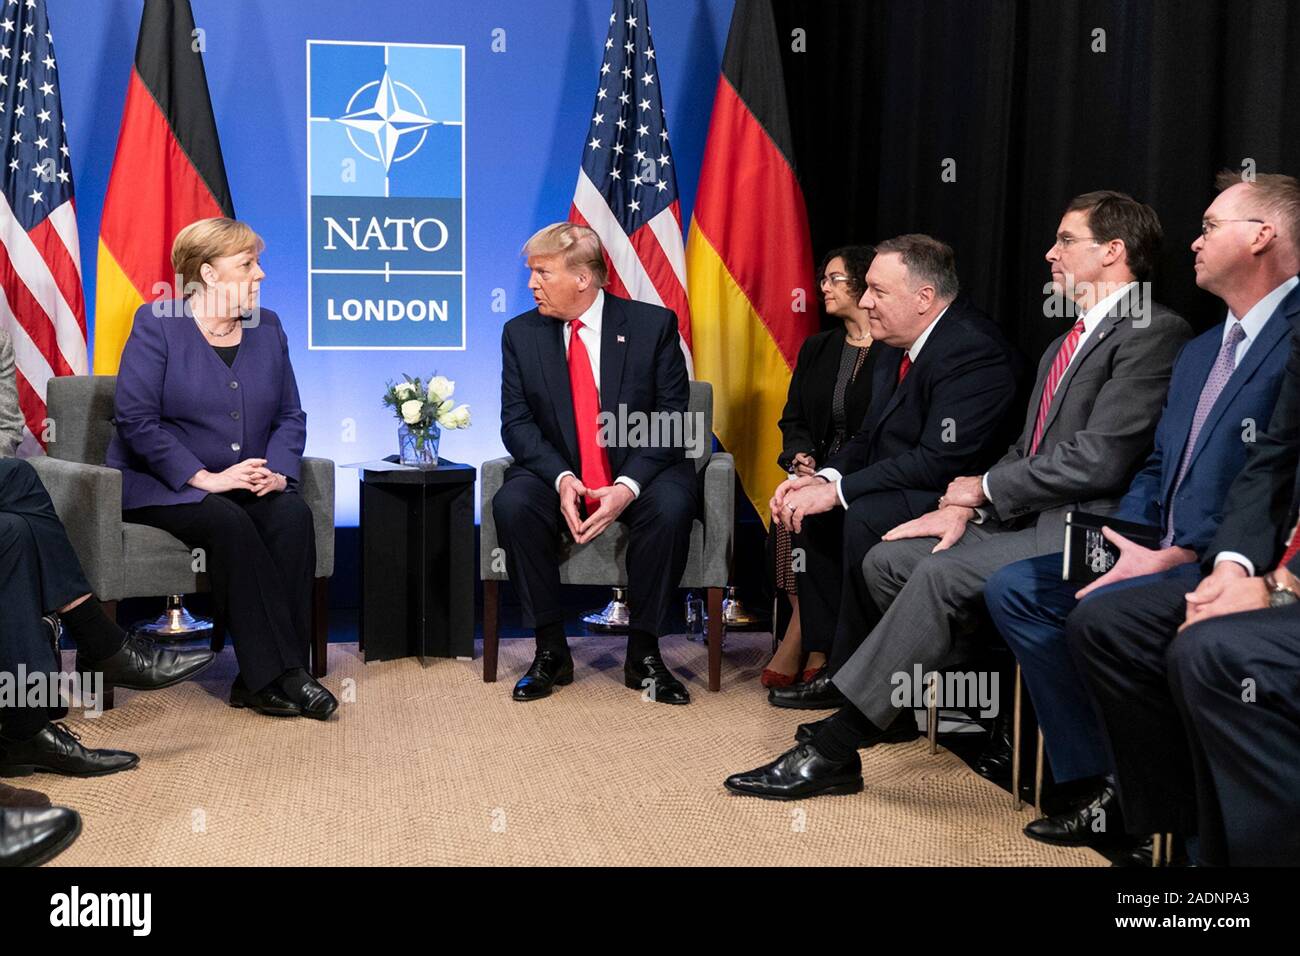 Watford, United Kingdom. 04 December, 2019. U.S. President Donald Trump and German Chancellor Angela Merkel hold a bilateral meeting on the sidelines of the NATO Summit December 4, 2019 in Watford, Hertfordshire, United Kingdom. Joining the president are Secretary of State Mike Pompeo, Secretary of Defense Mark Esper and Chief of Staff Mick Mulvaney.   Credit: Shealah Craighead/Planetpix/Alamy Live News Stock Photo